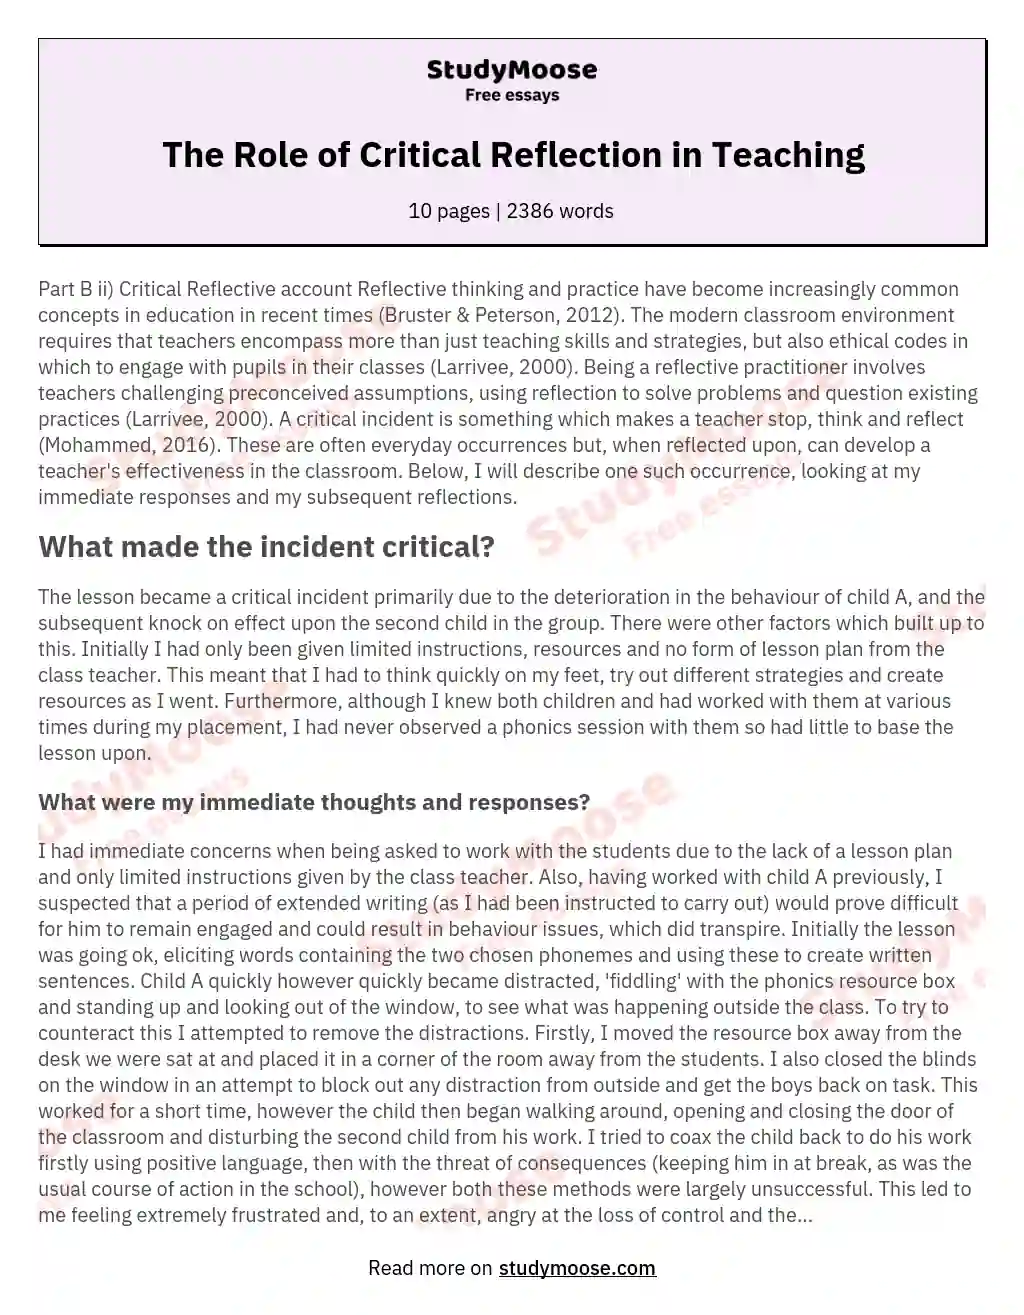 The Role of Critical Reflection in Teaching essay